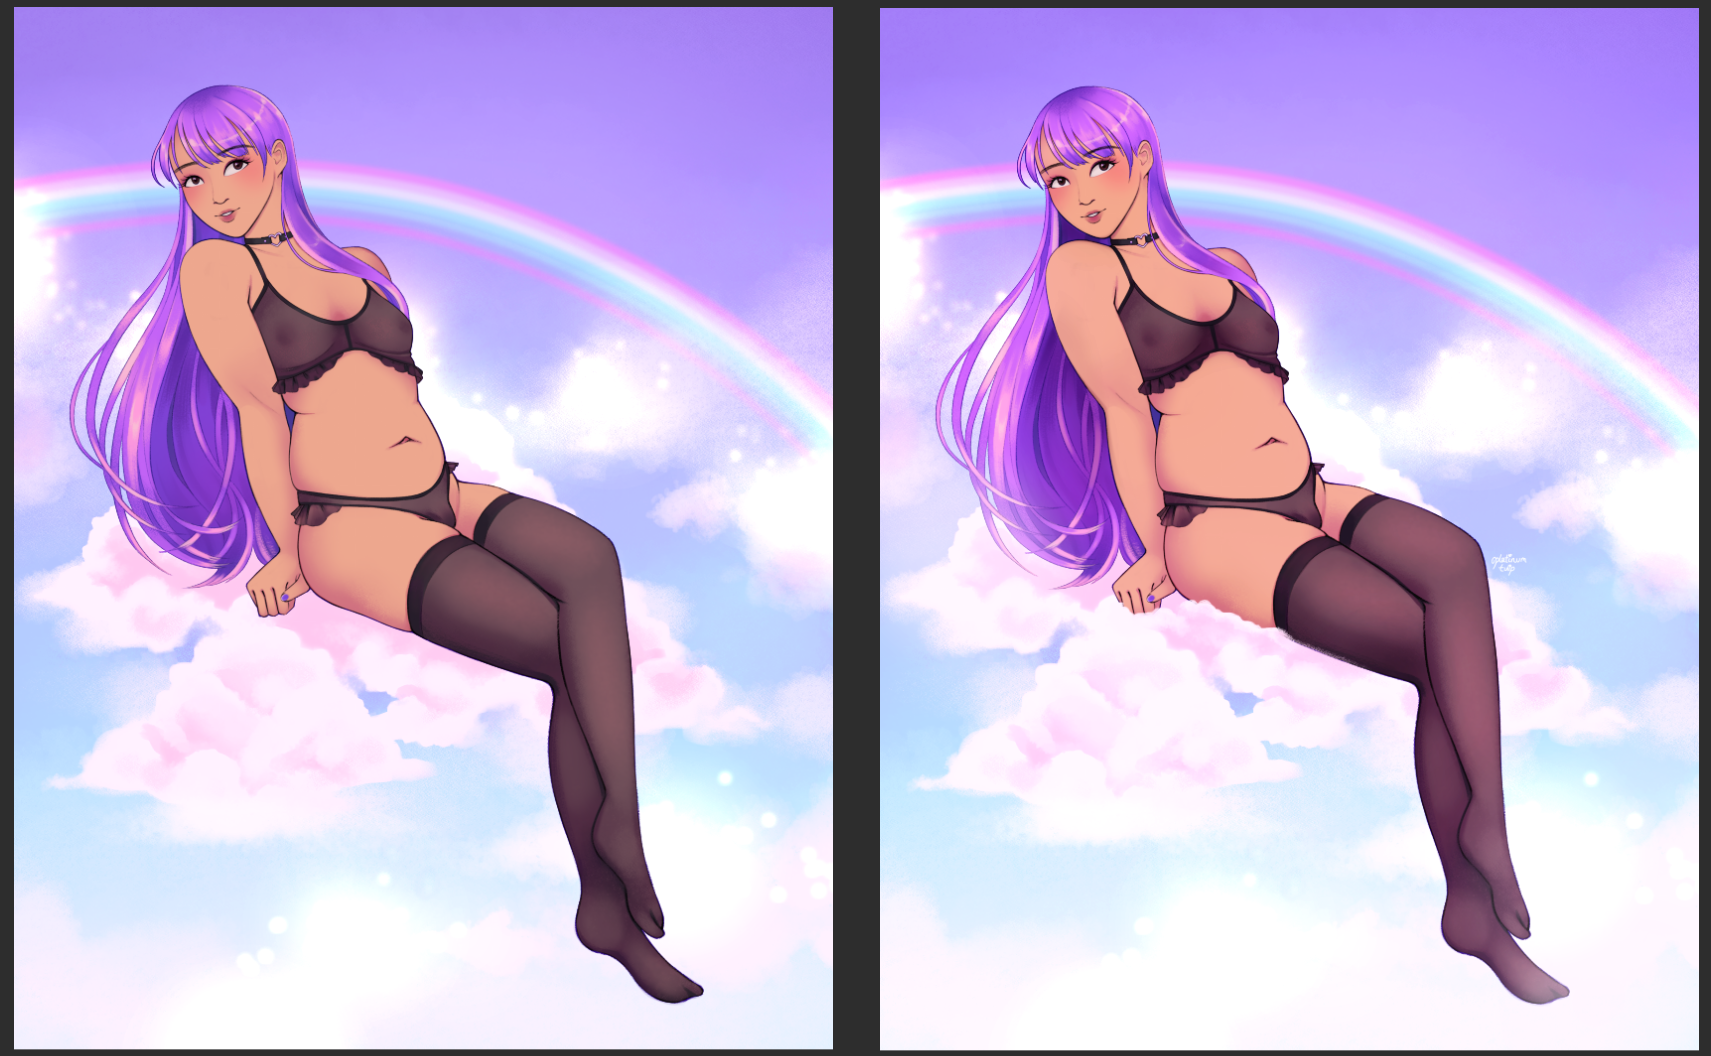 two images, a before and after. the after image looks slightly more high contrast, with darker shadows